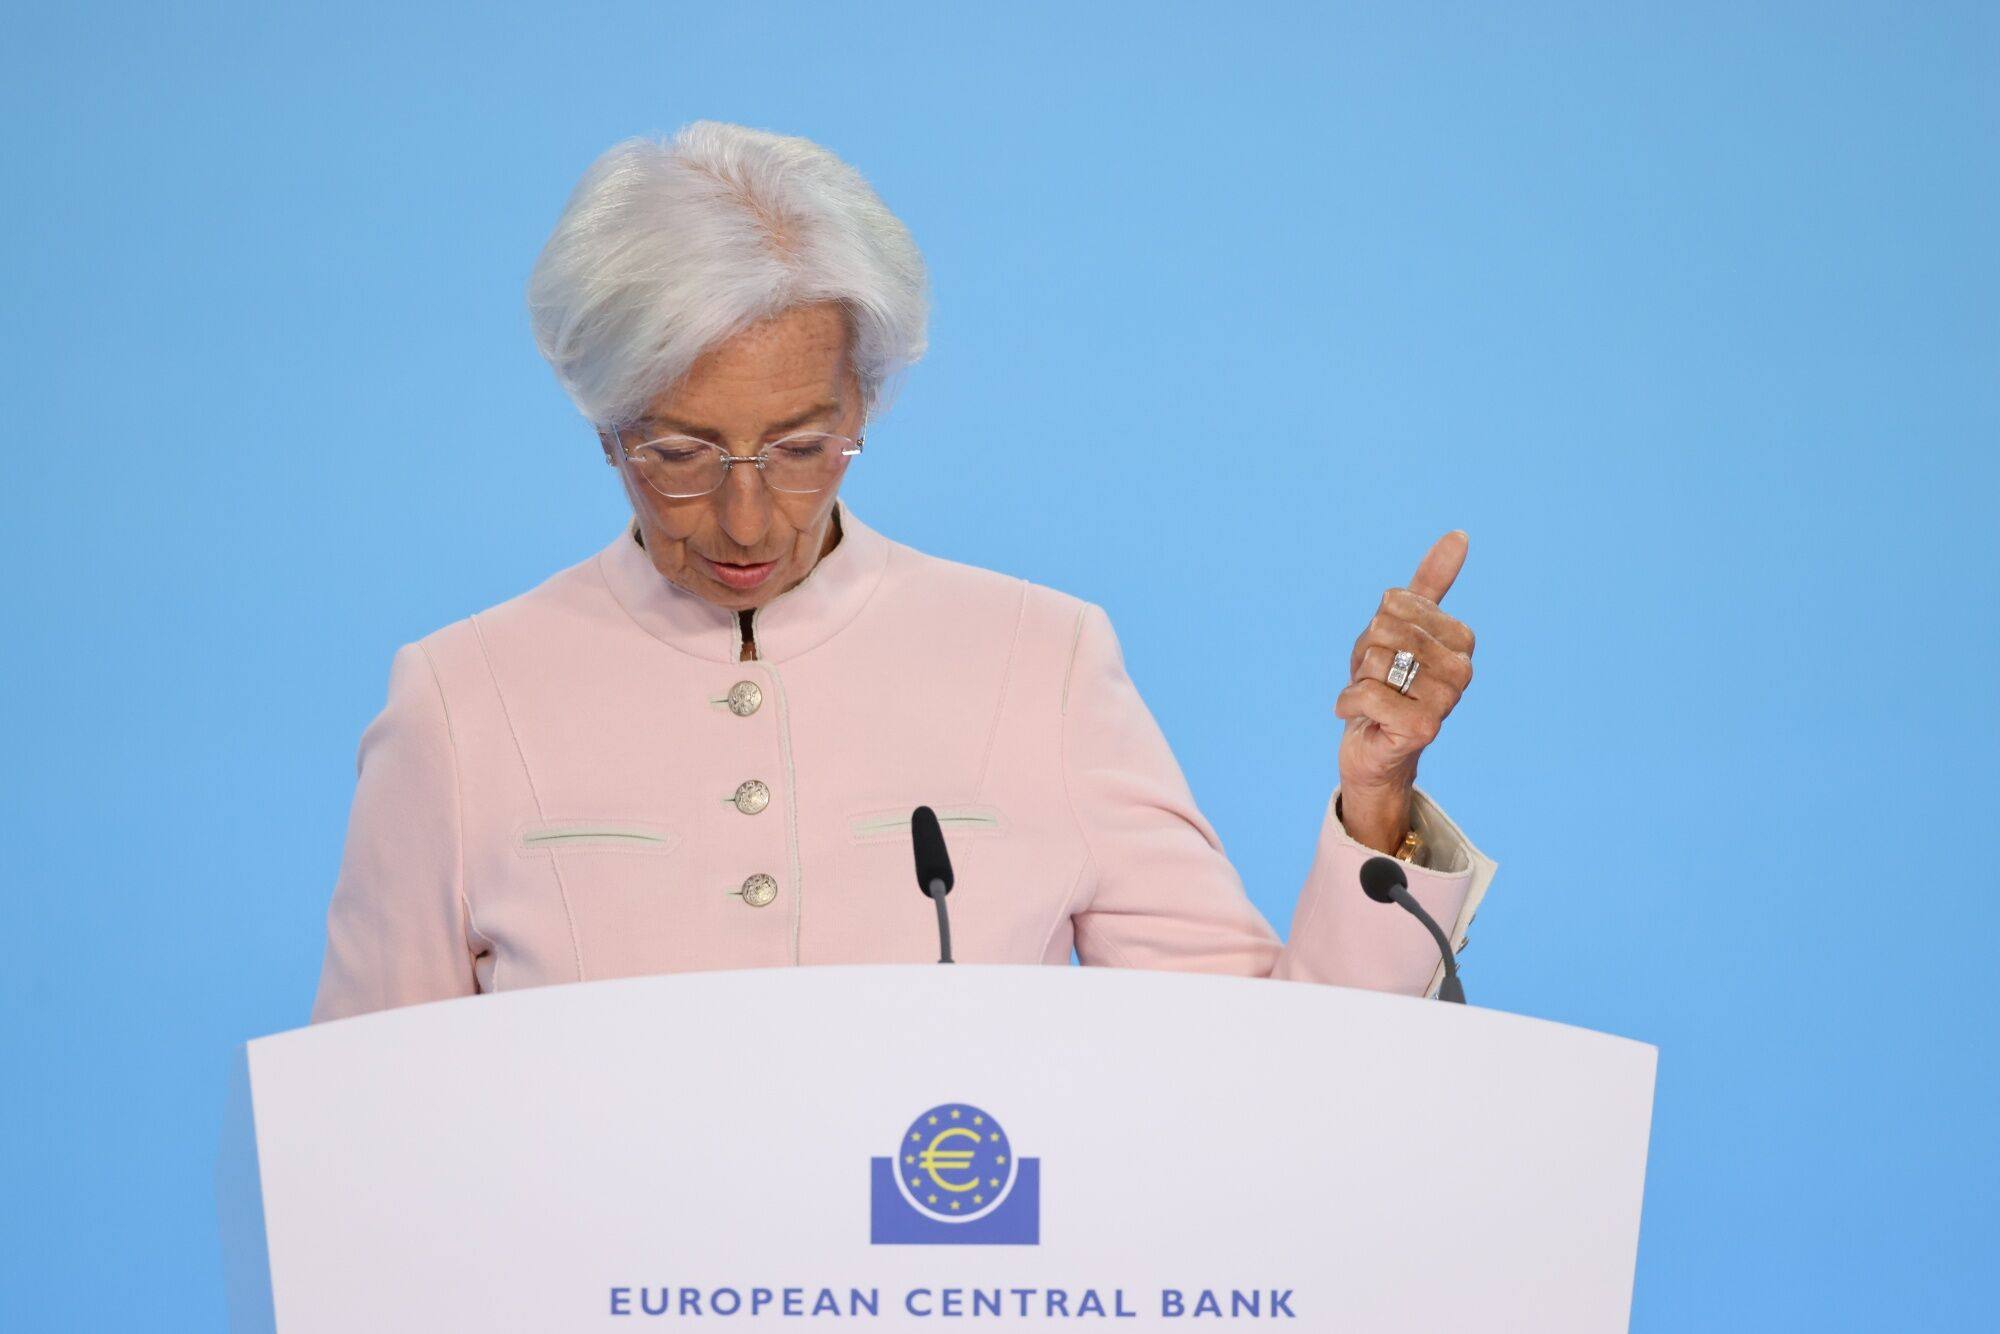 European Central Bank president Christine Lagarde speaks at a rates decision news conference in Frankfurt, Germany, on September 14. The ECB raised interest rates this month for the 10th consecutive time to try to choke inflation out of the euro zone’s increasingly feeble economy. Photo: Bloomberg